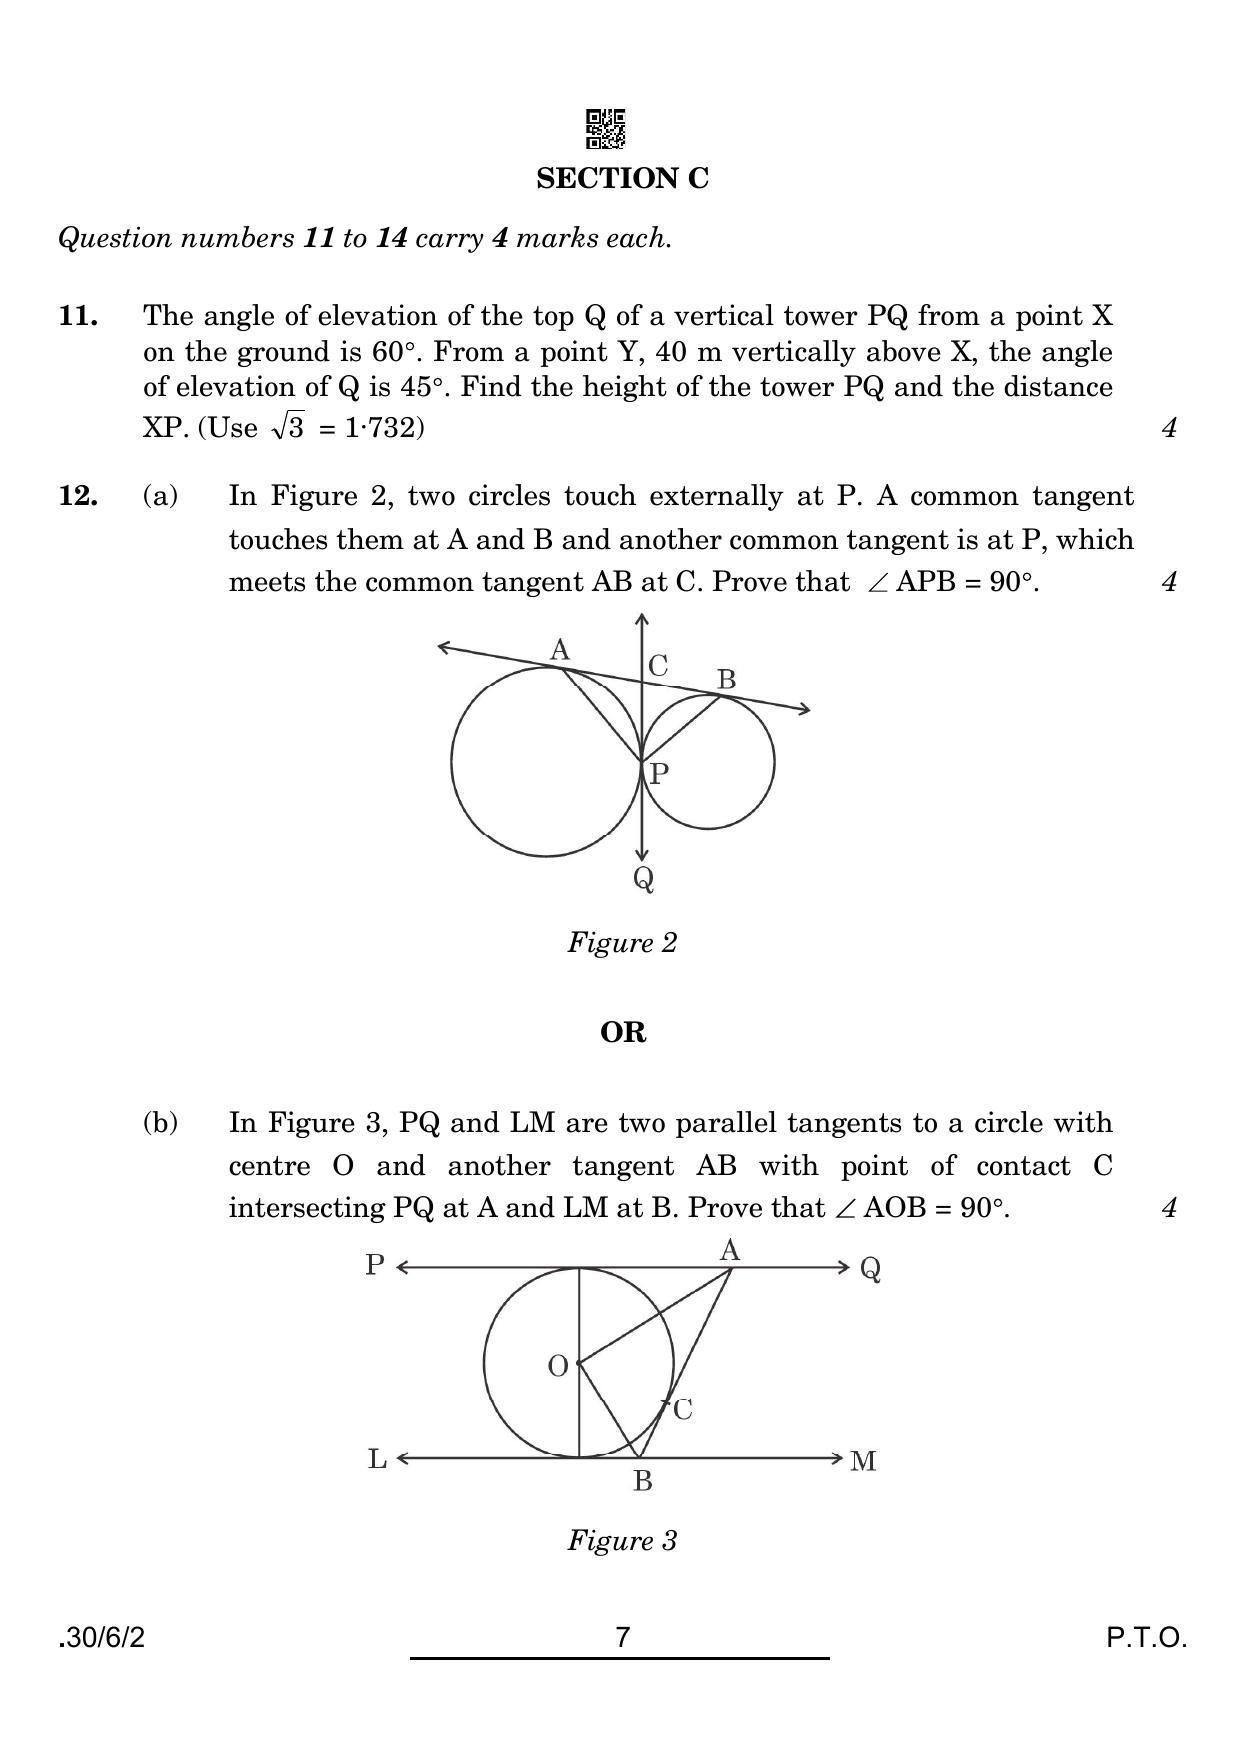 CBSE Class 10 30-6-2 Maths Std. 2022 Compartment Question Paper - Page 7